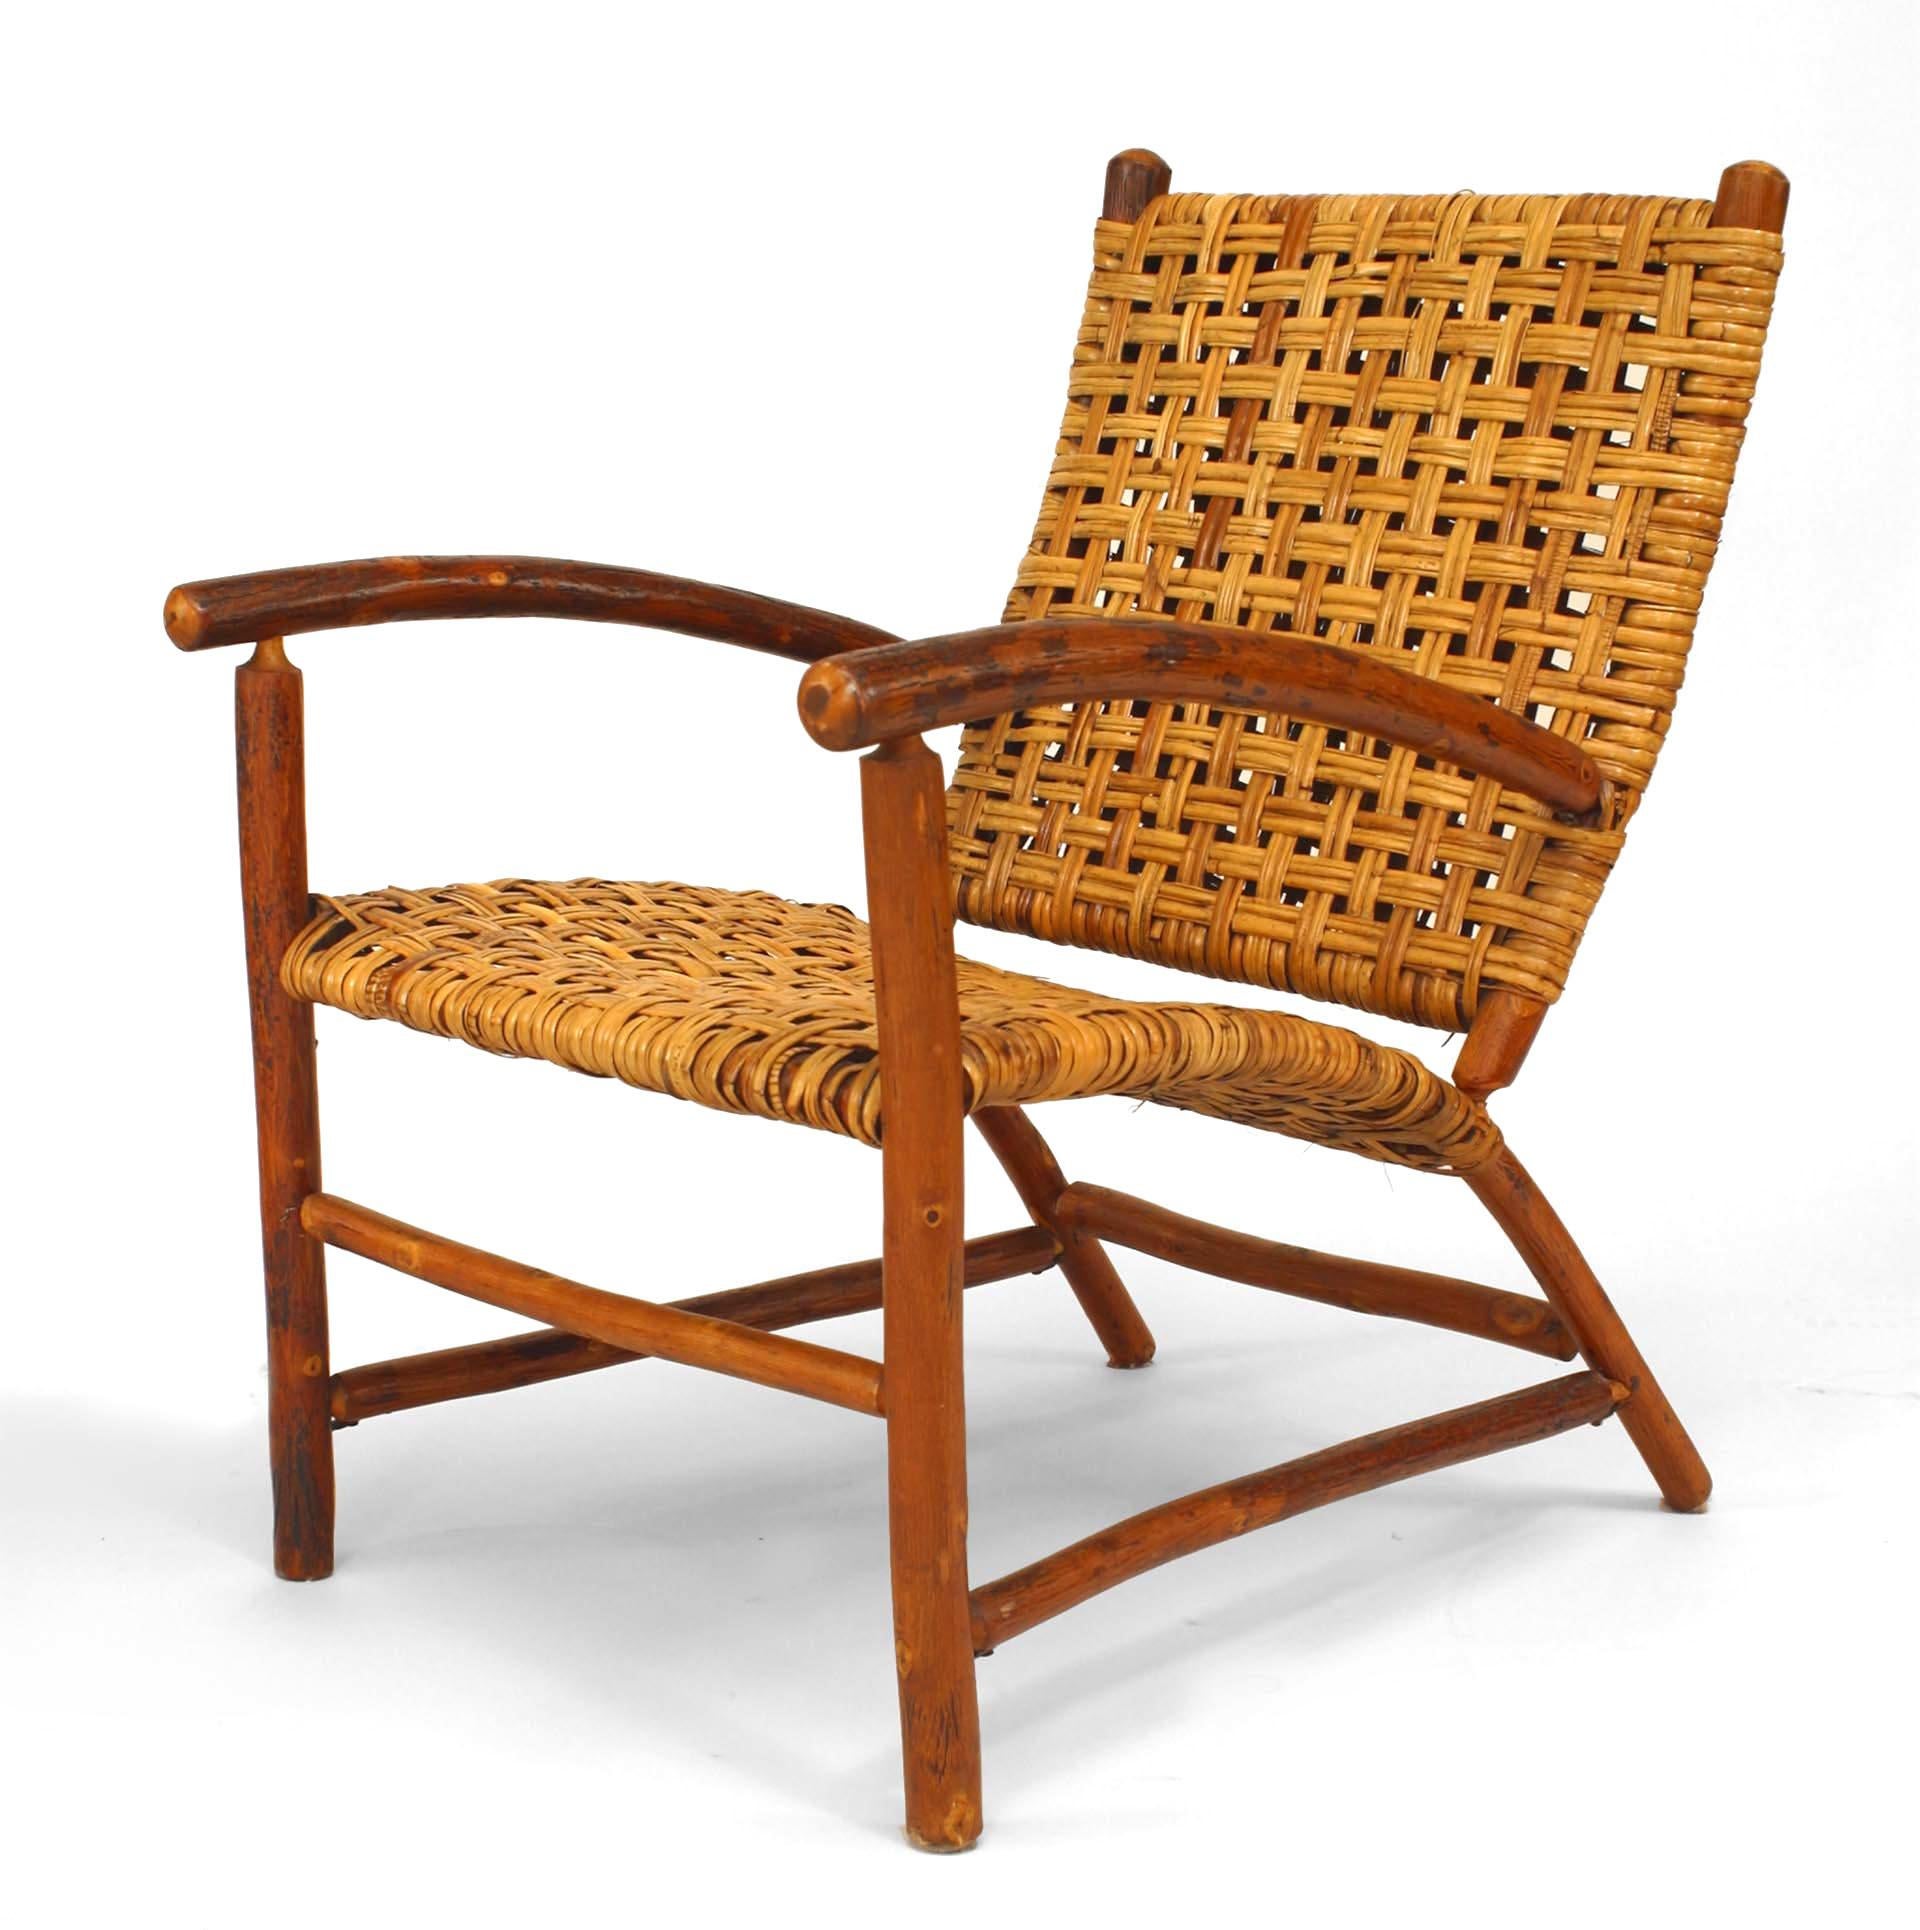 American Rustic Old Hickory (1940/50s) open arm chair with woven seat and back. (Includes ottoman: 24